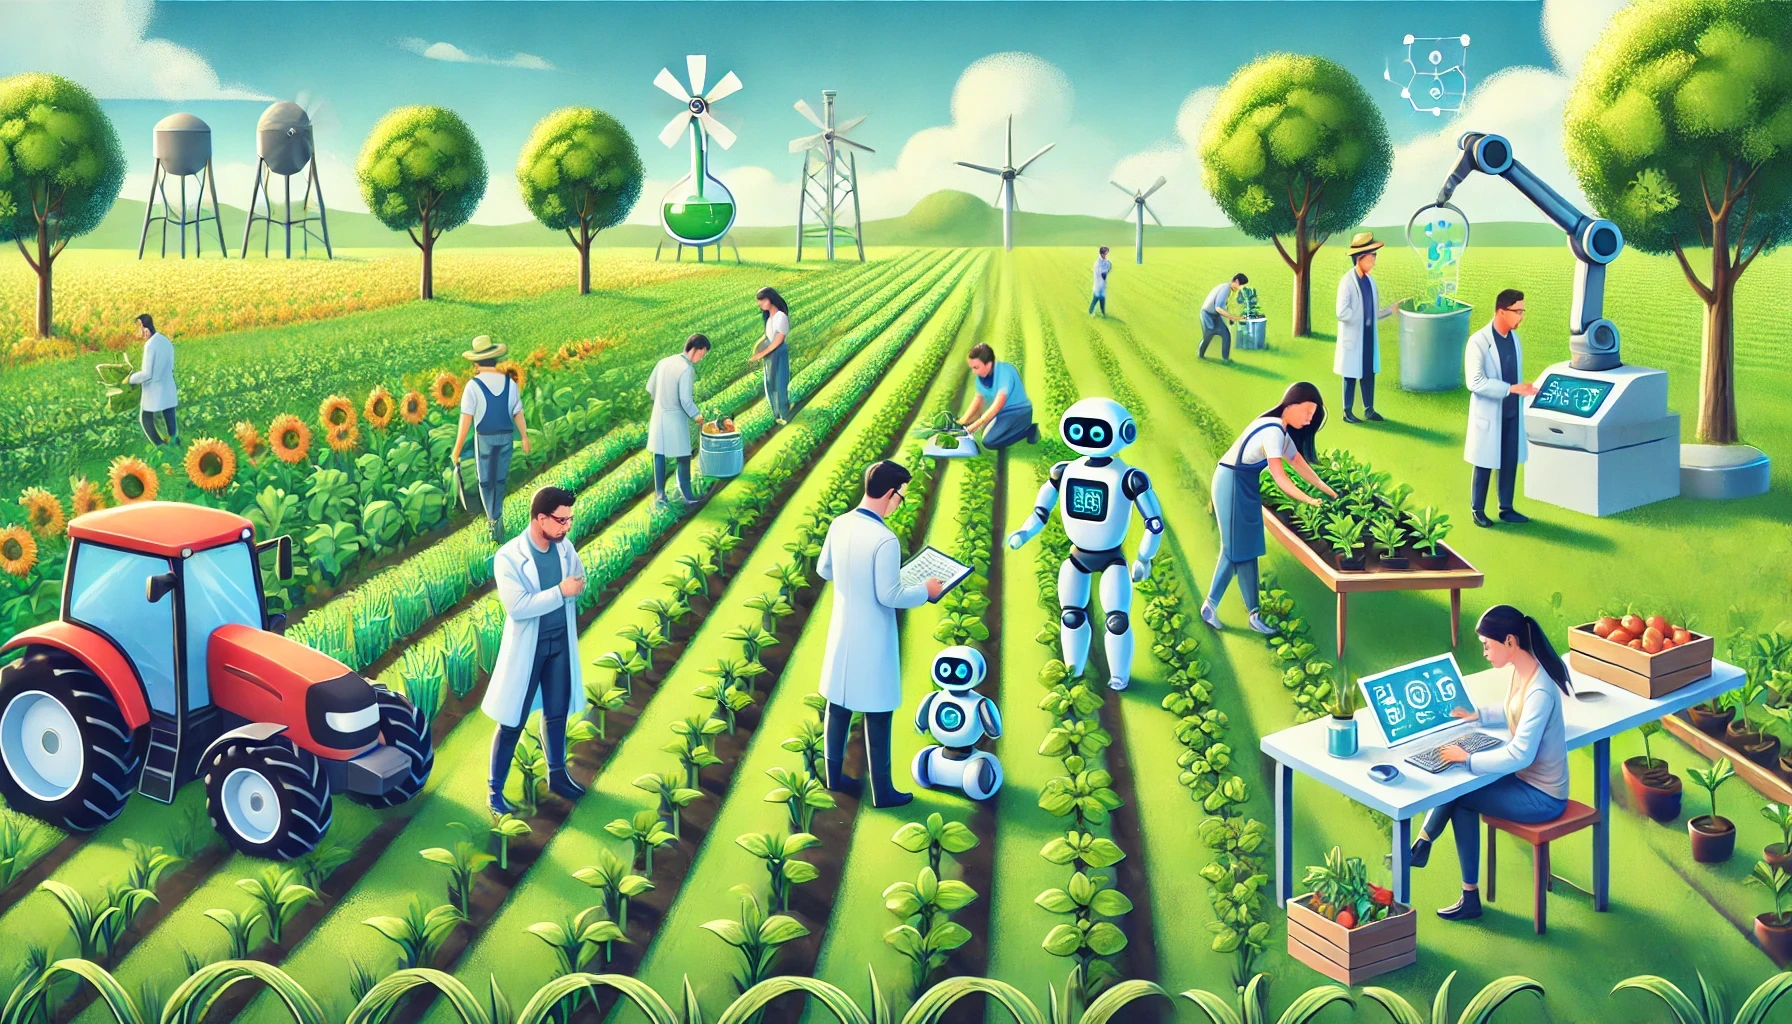 Mistral’s new model ditches transformers: Plus, can AI transform the agriculture industry?